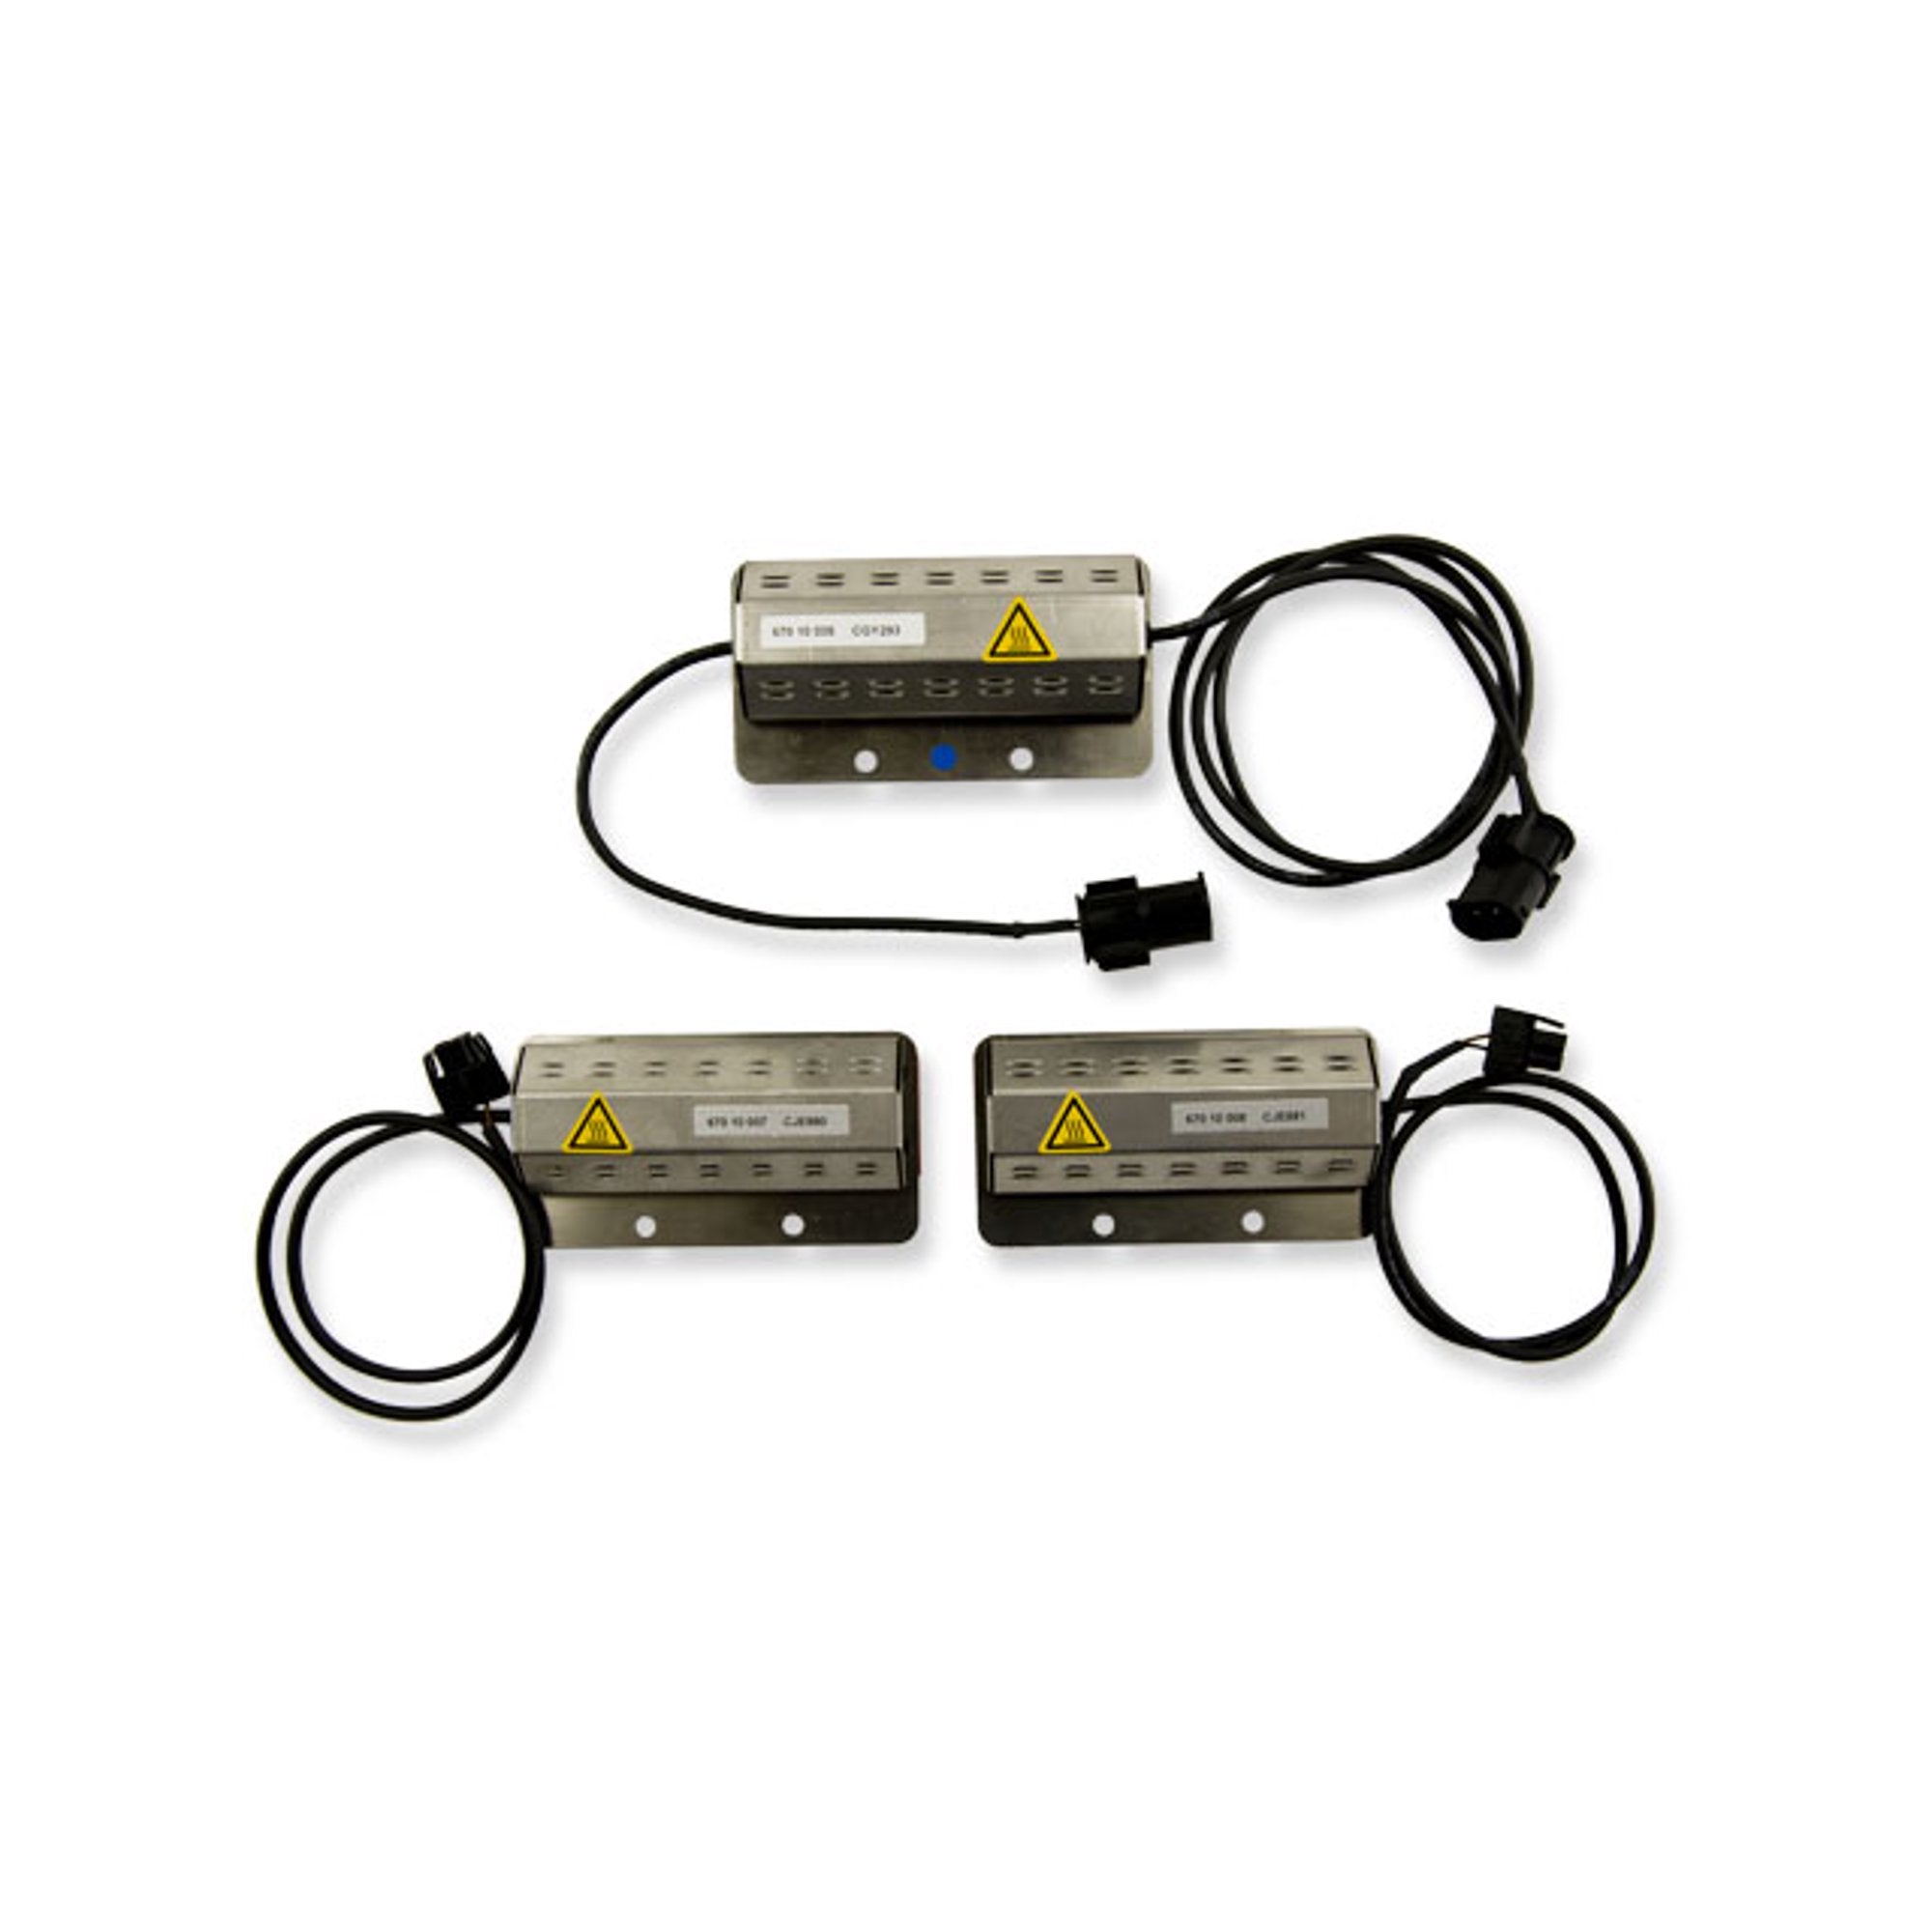 KW Electronic Damping Cancellation Kit 2008-2014 Ford Mustang Shelby GT500